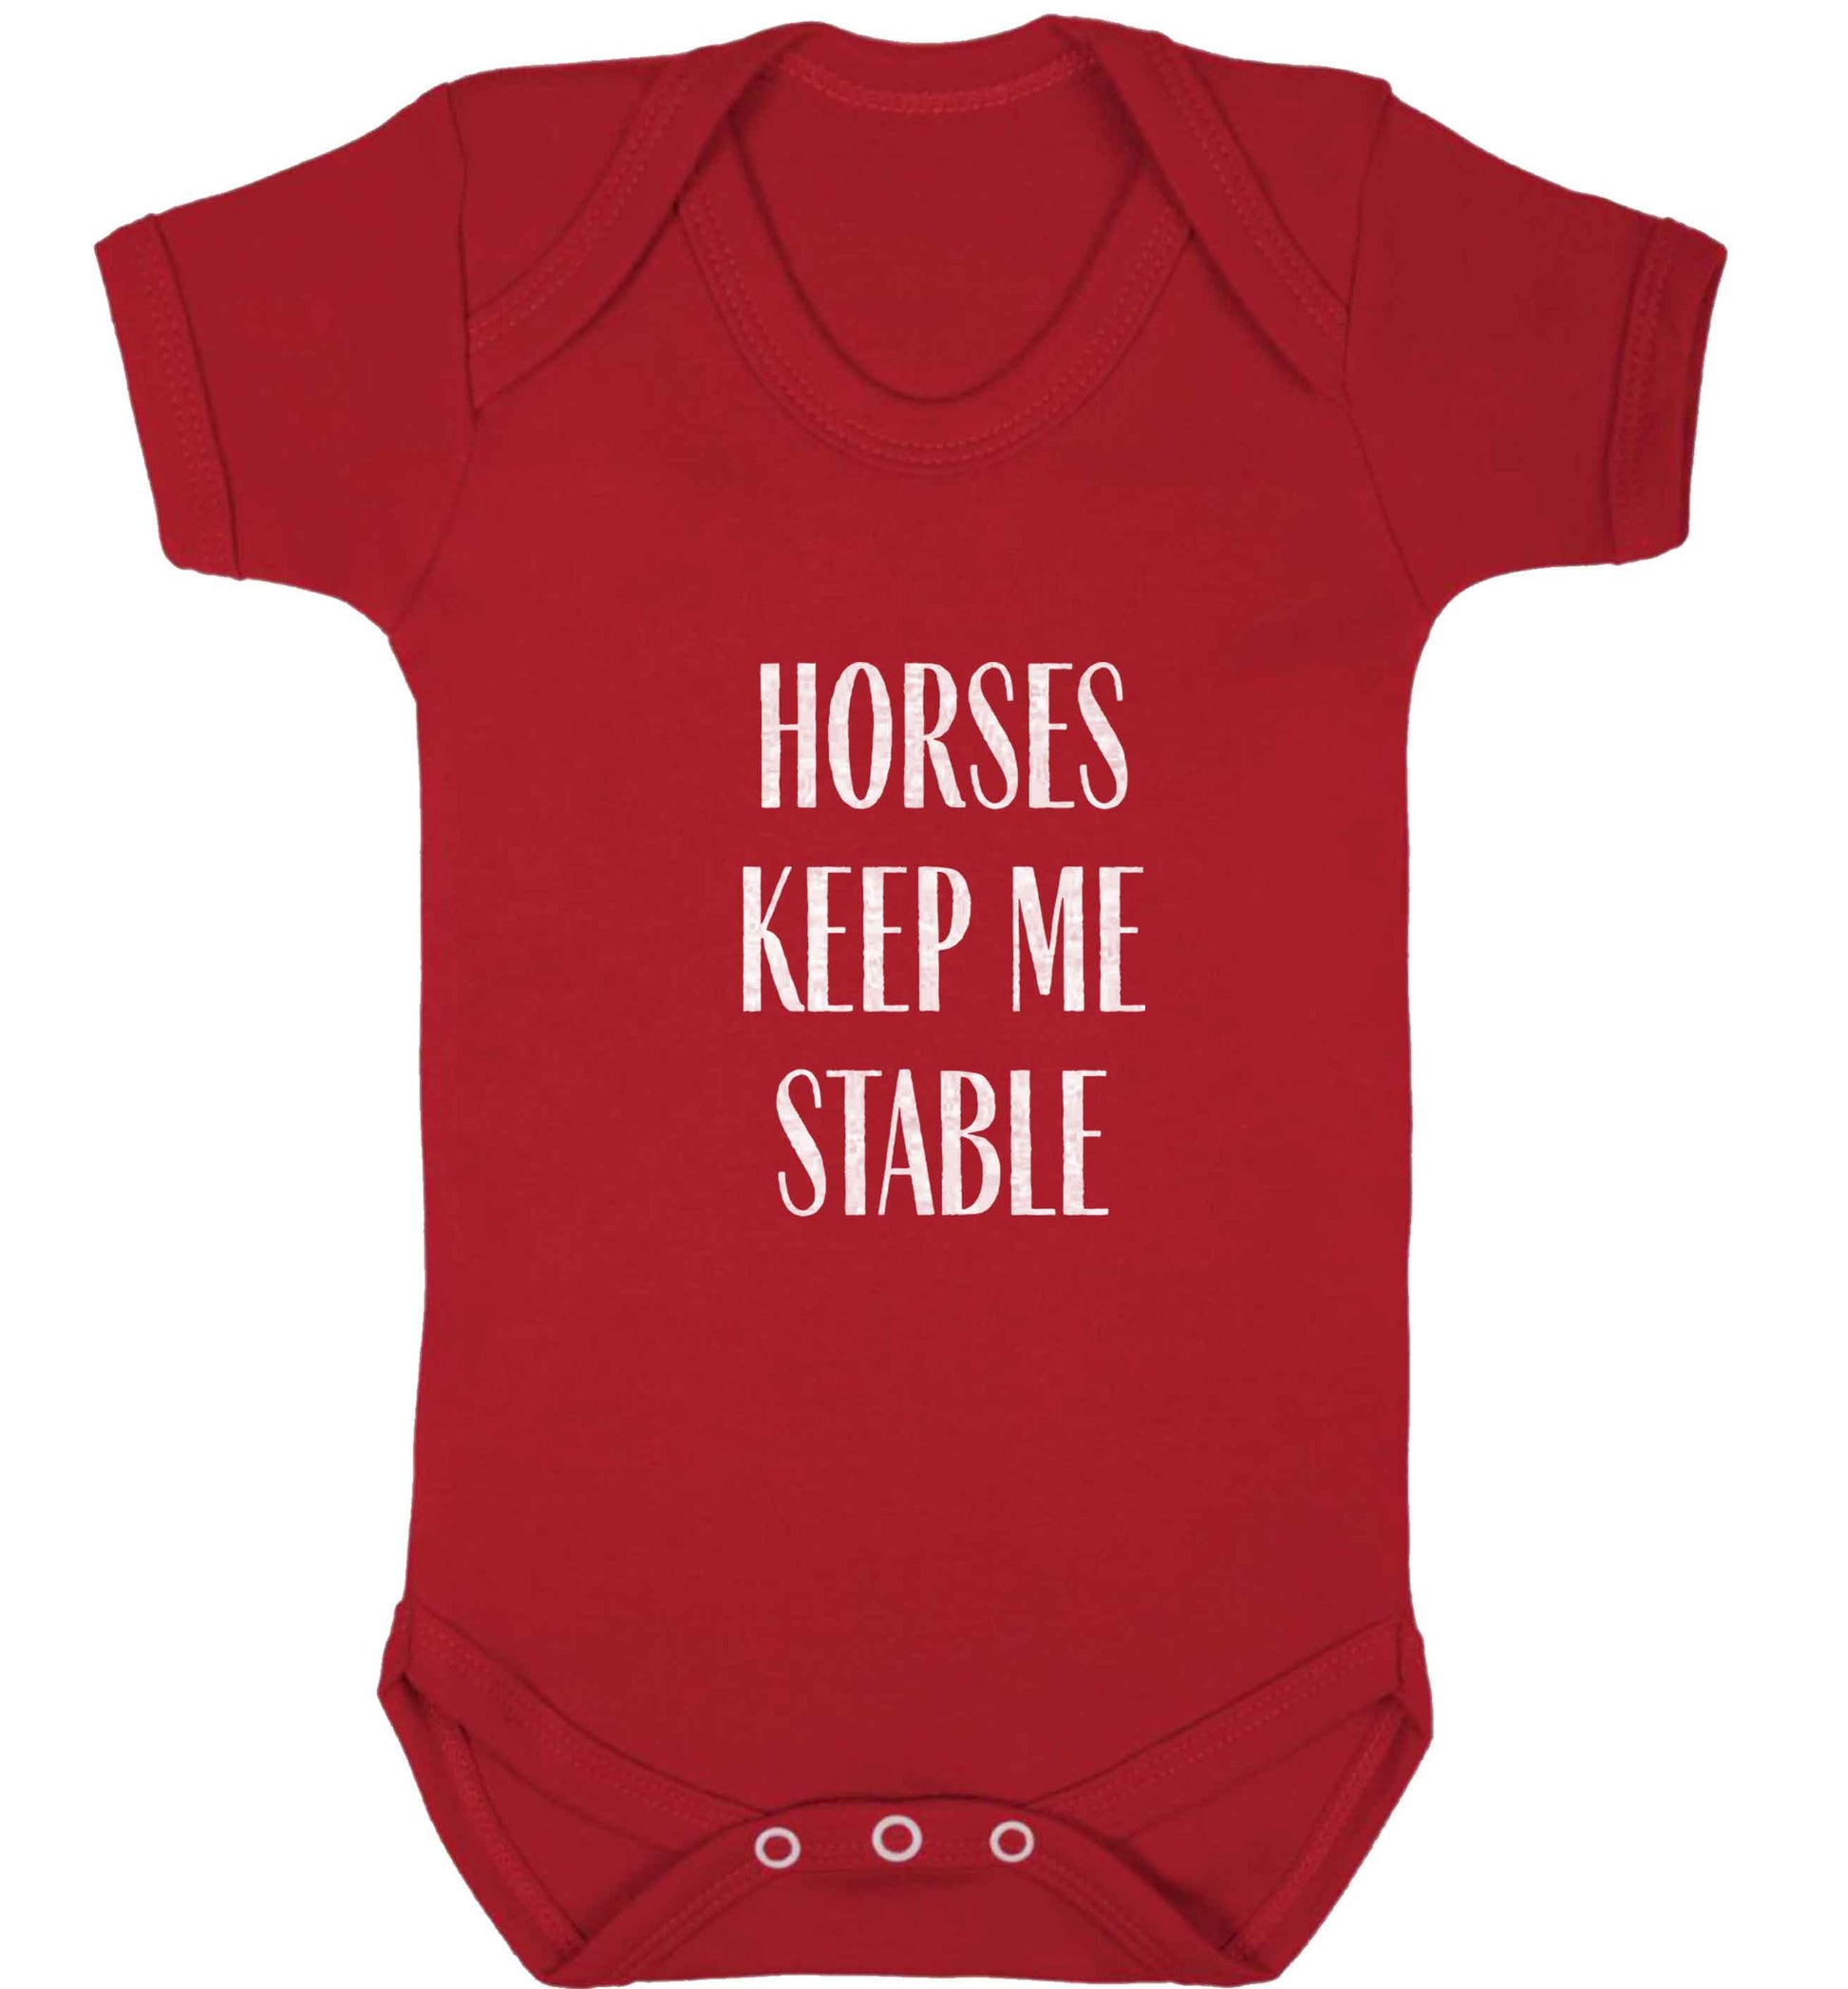 Horses keep me stable baby vest red 18-24 months